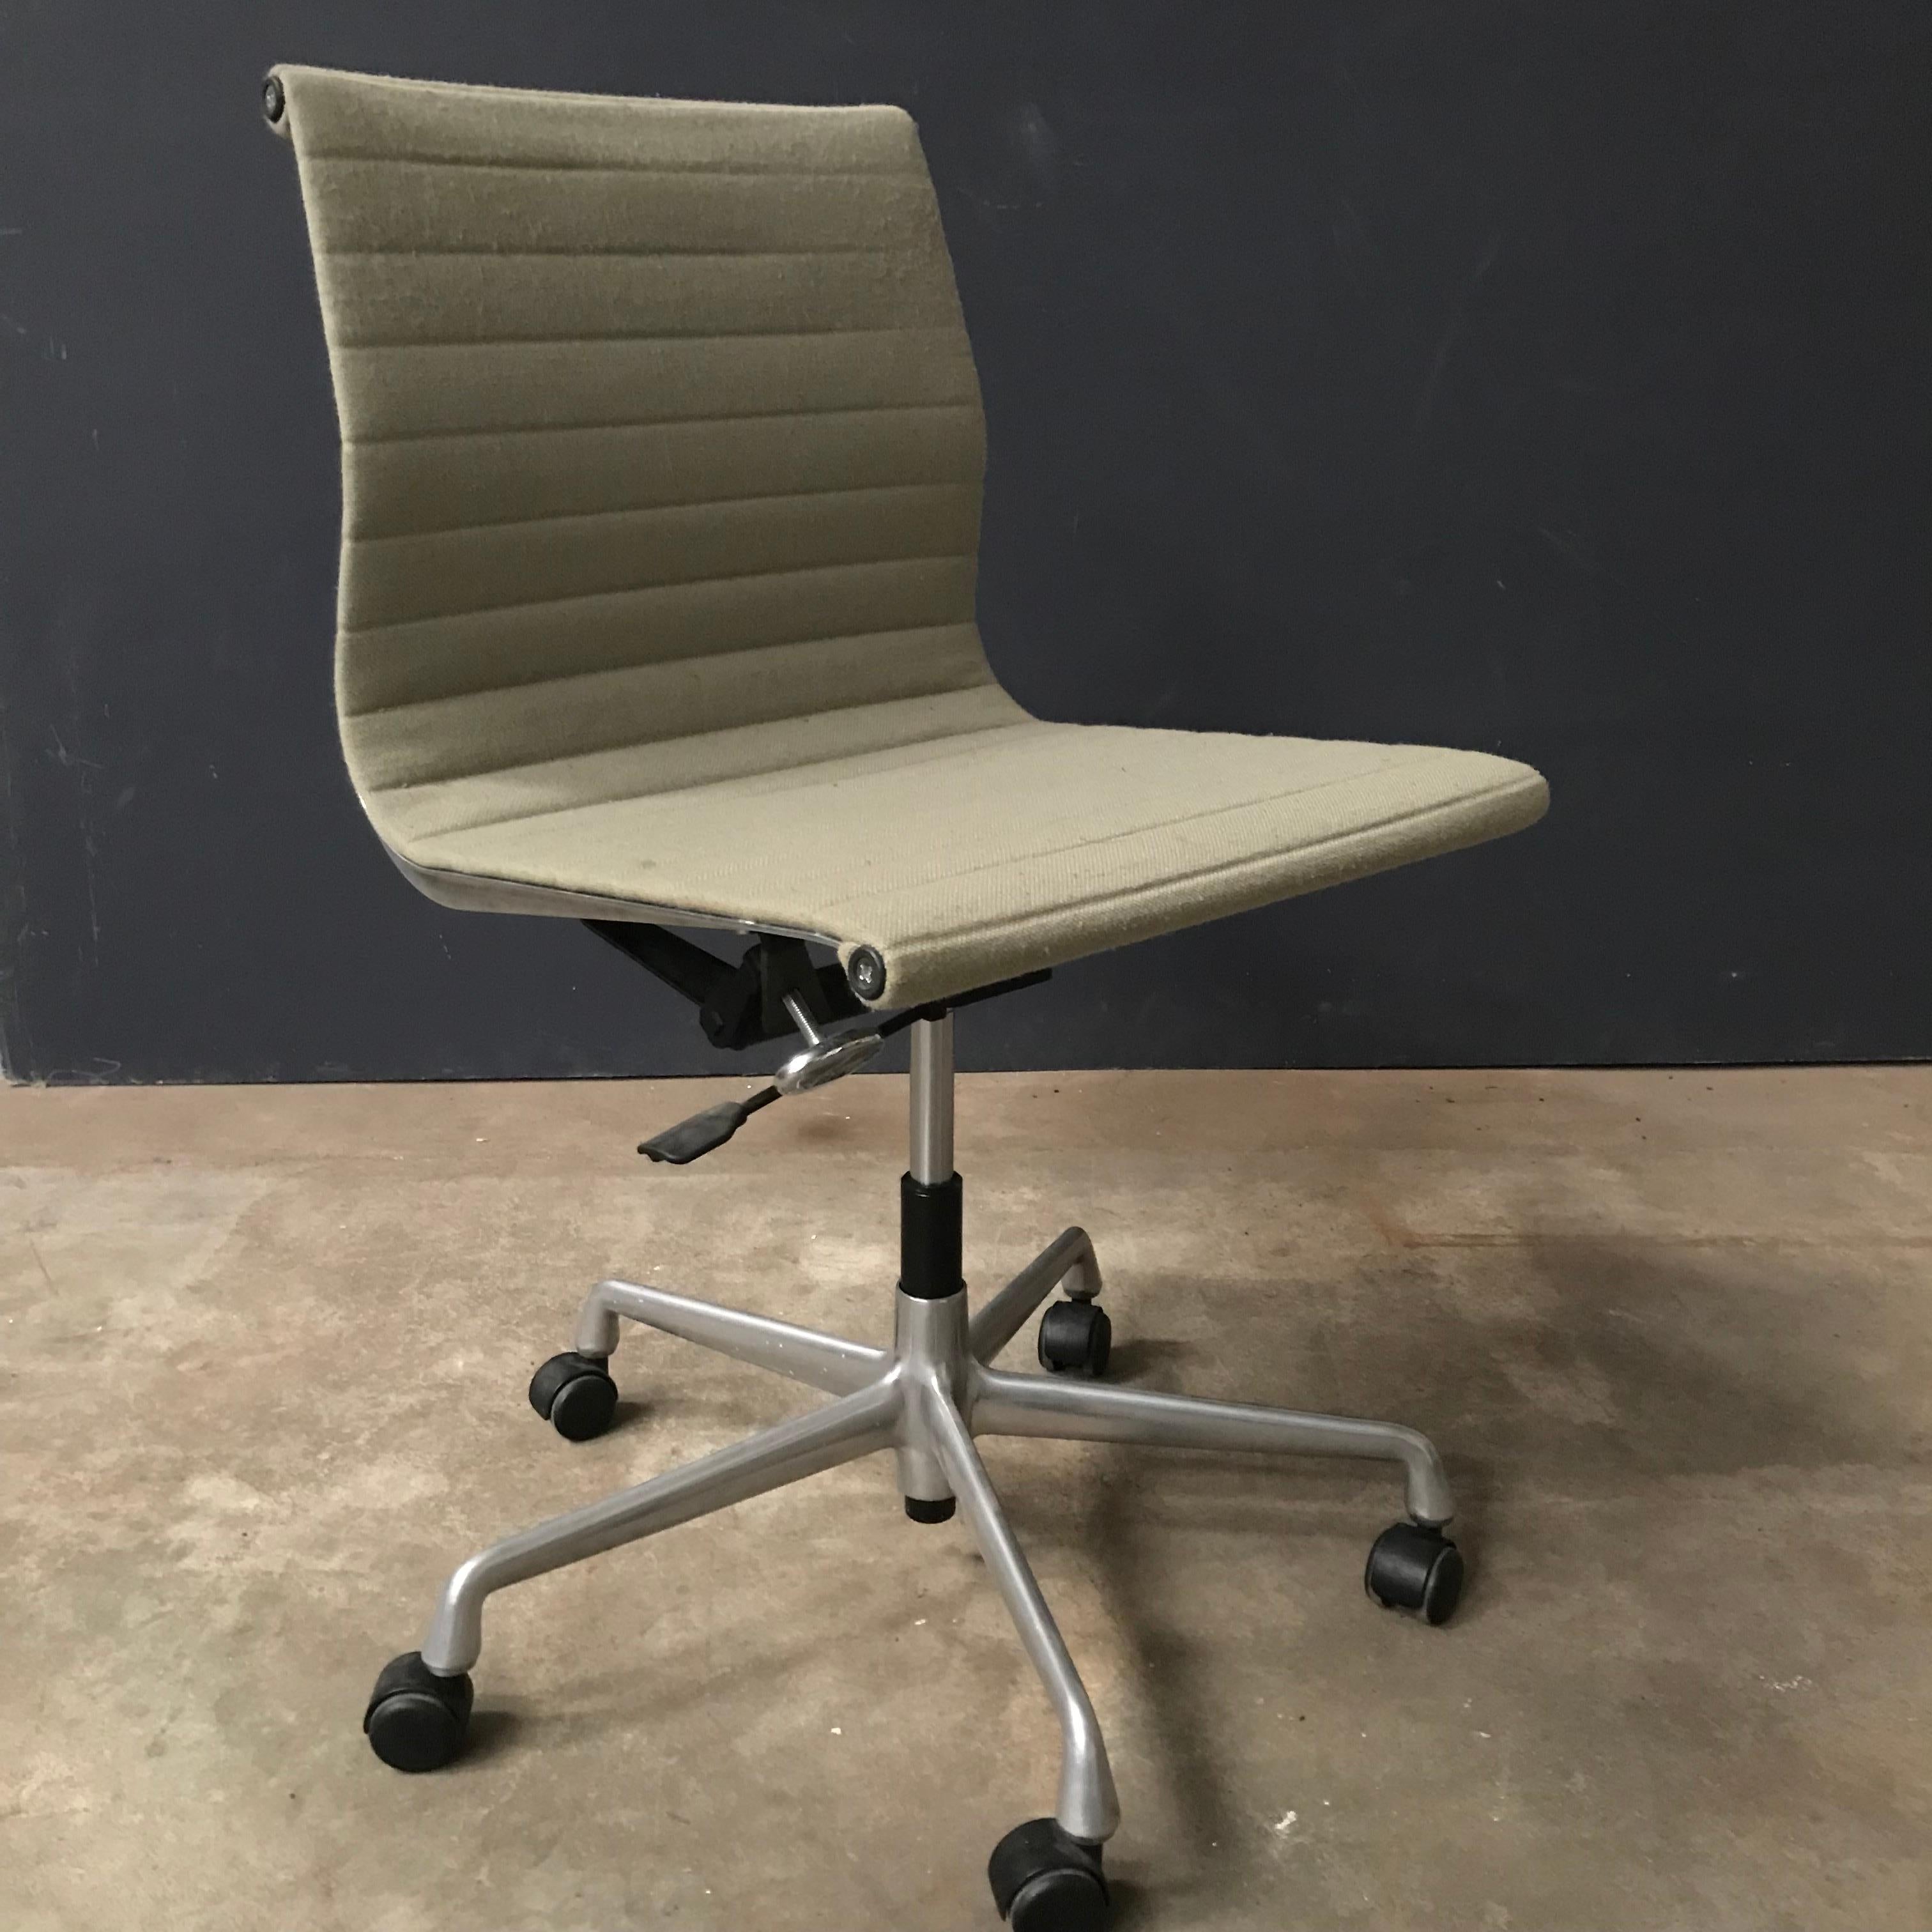 1958 Ray and Charles Eames, Fabric, Adjust, Tilt, Office Chair 4 Wheels No Arms For Sale 1